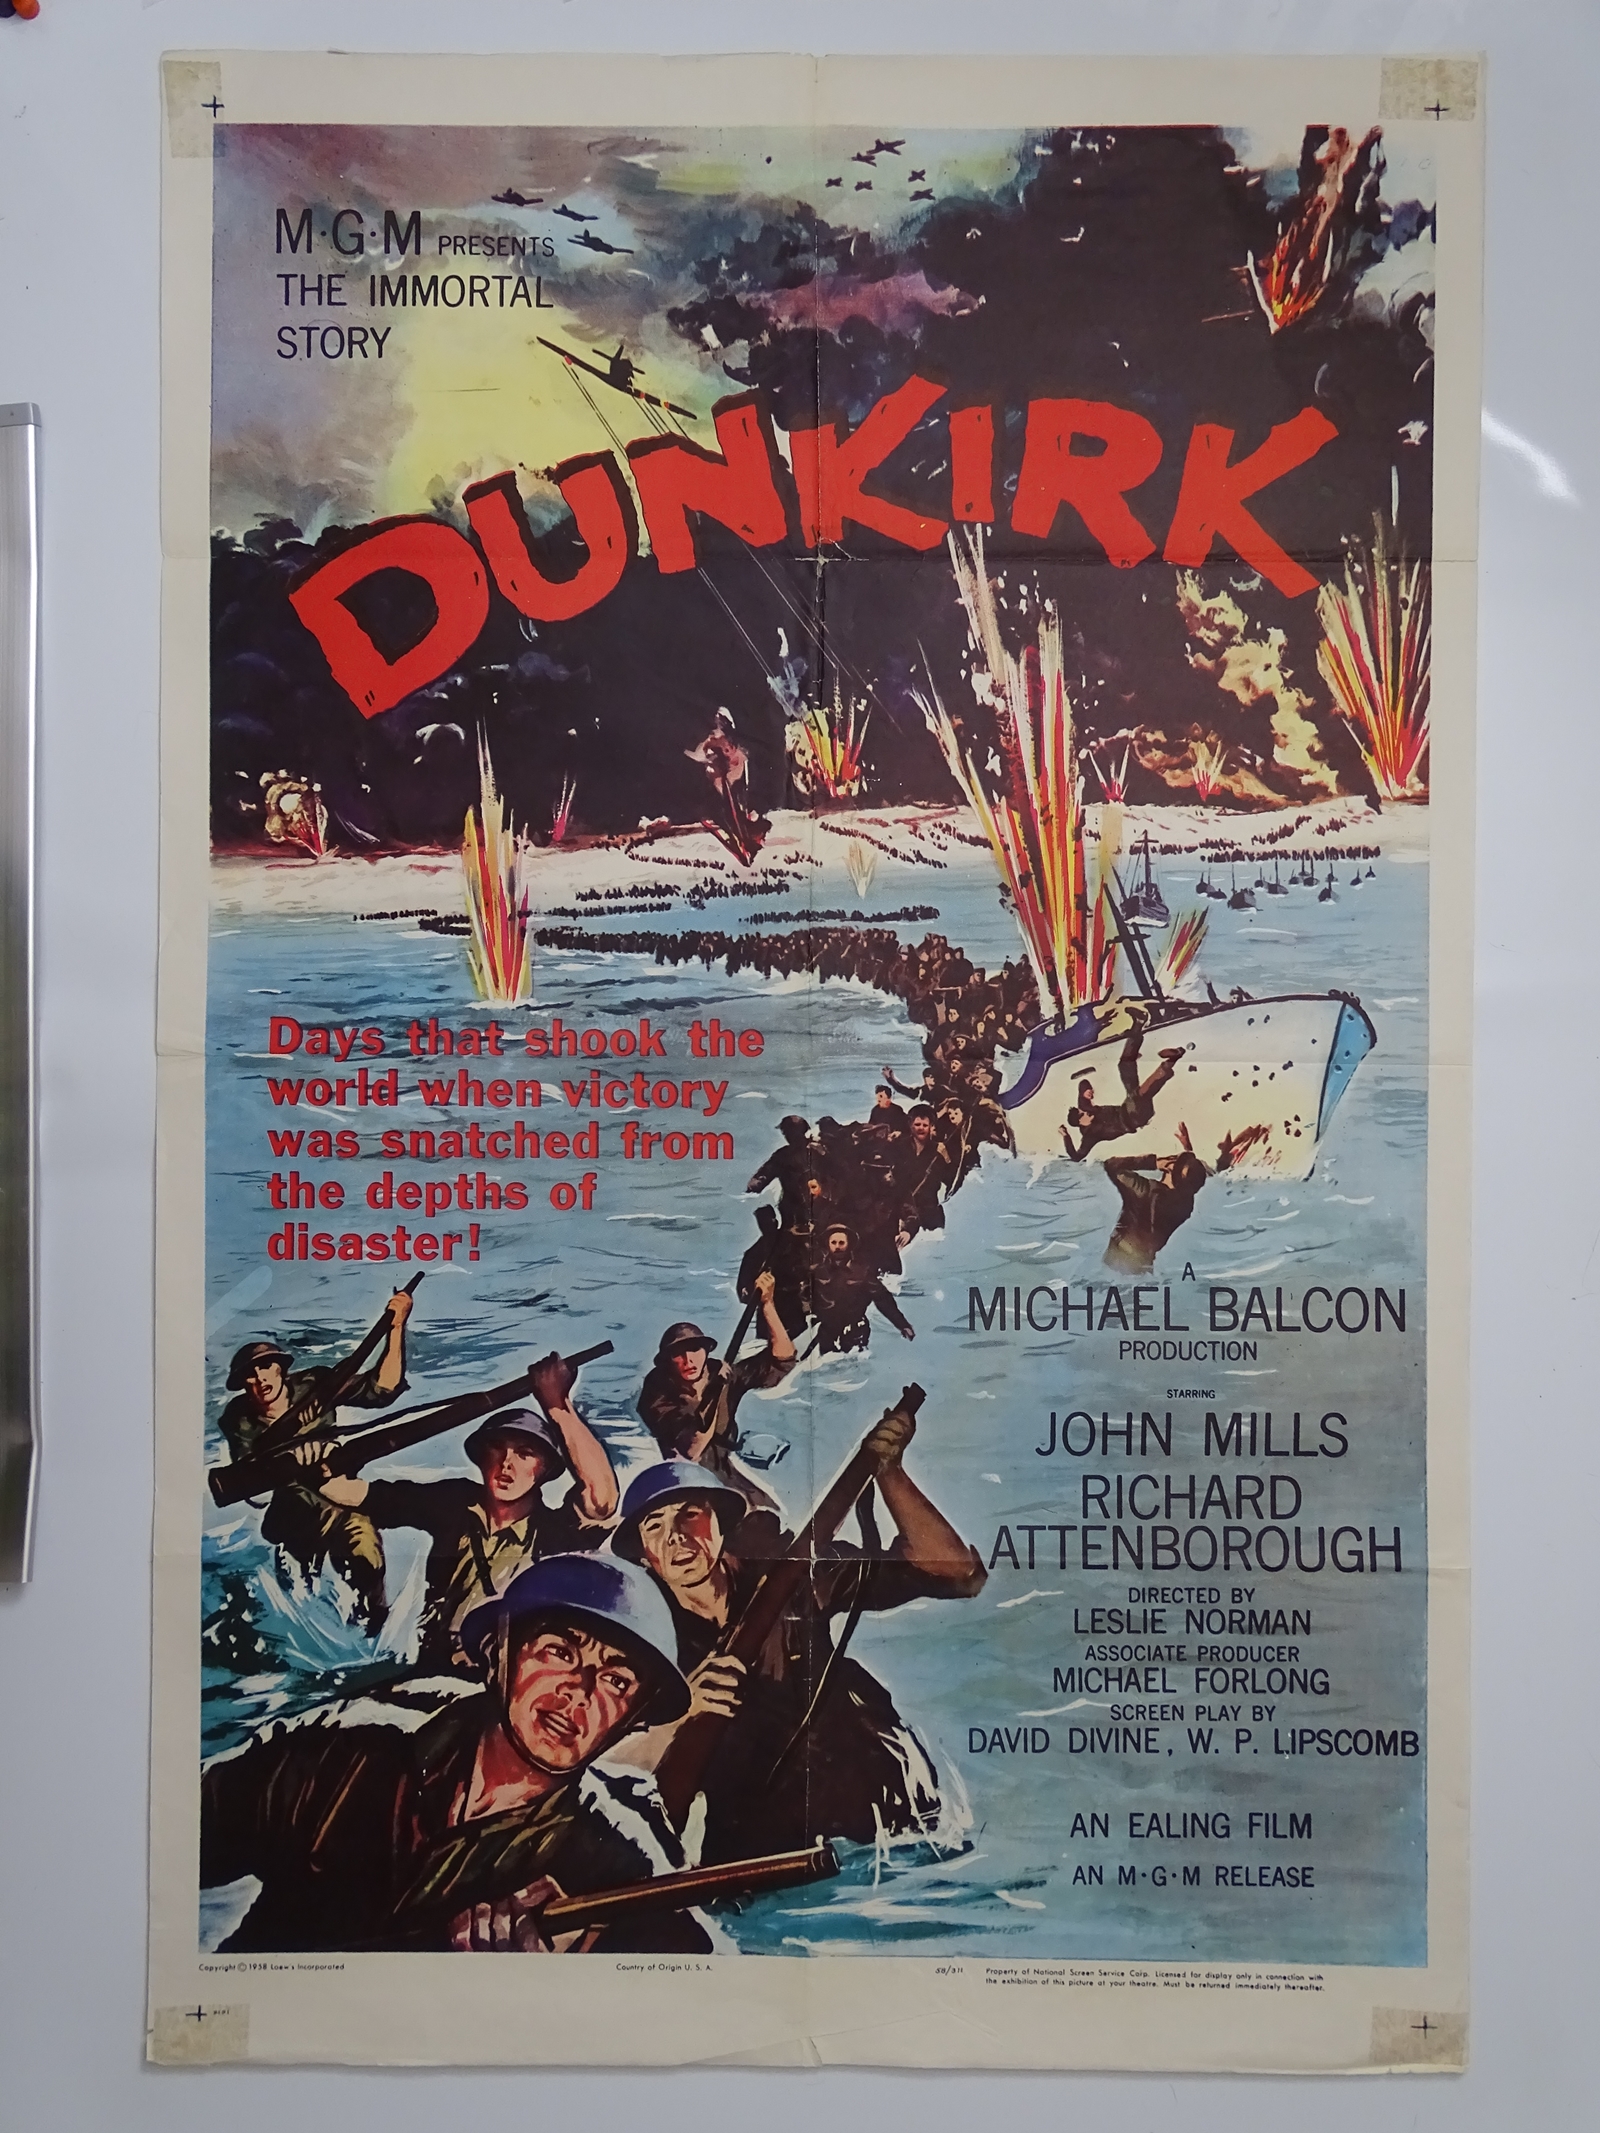 DUNKIRK (1958) One Sheet Movie poster (27” x 40” – 68.5 x 101.5 cm) - Folded - some tape marks